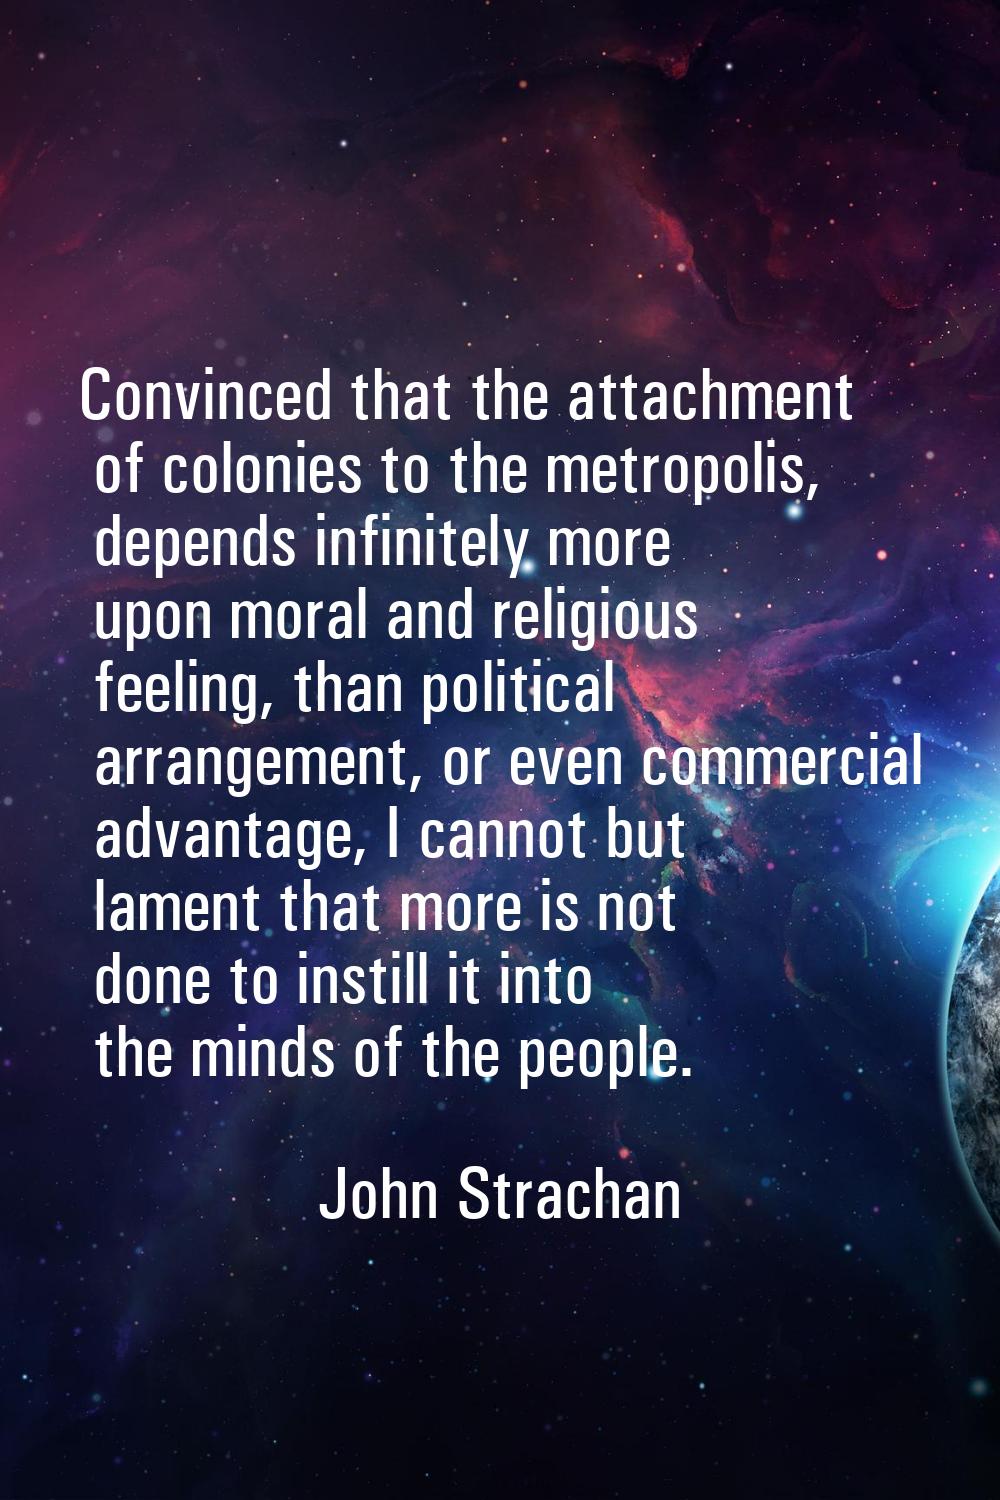 Convinced that the attachment of colonies to the metropolis, depends infinitely more upon moral and